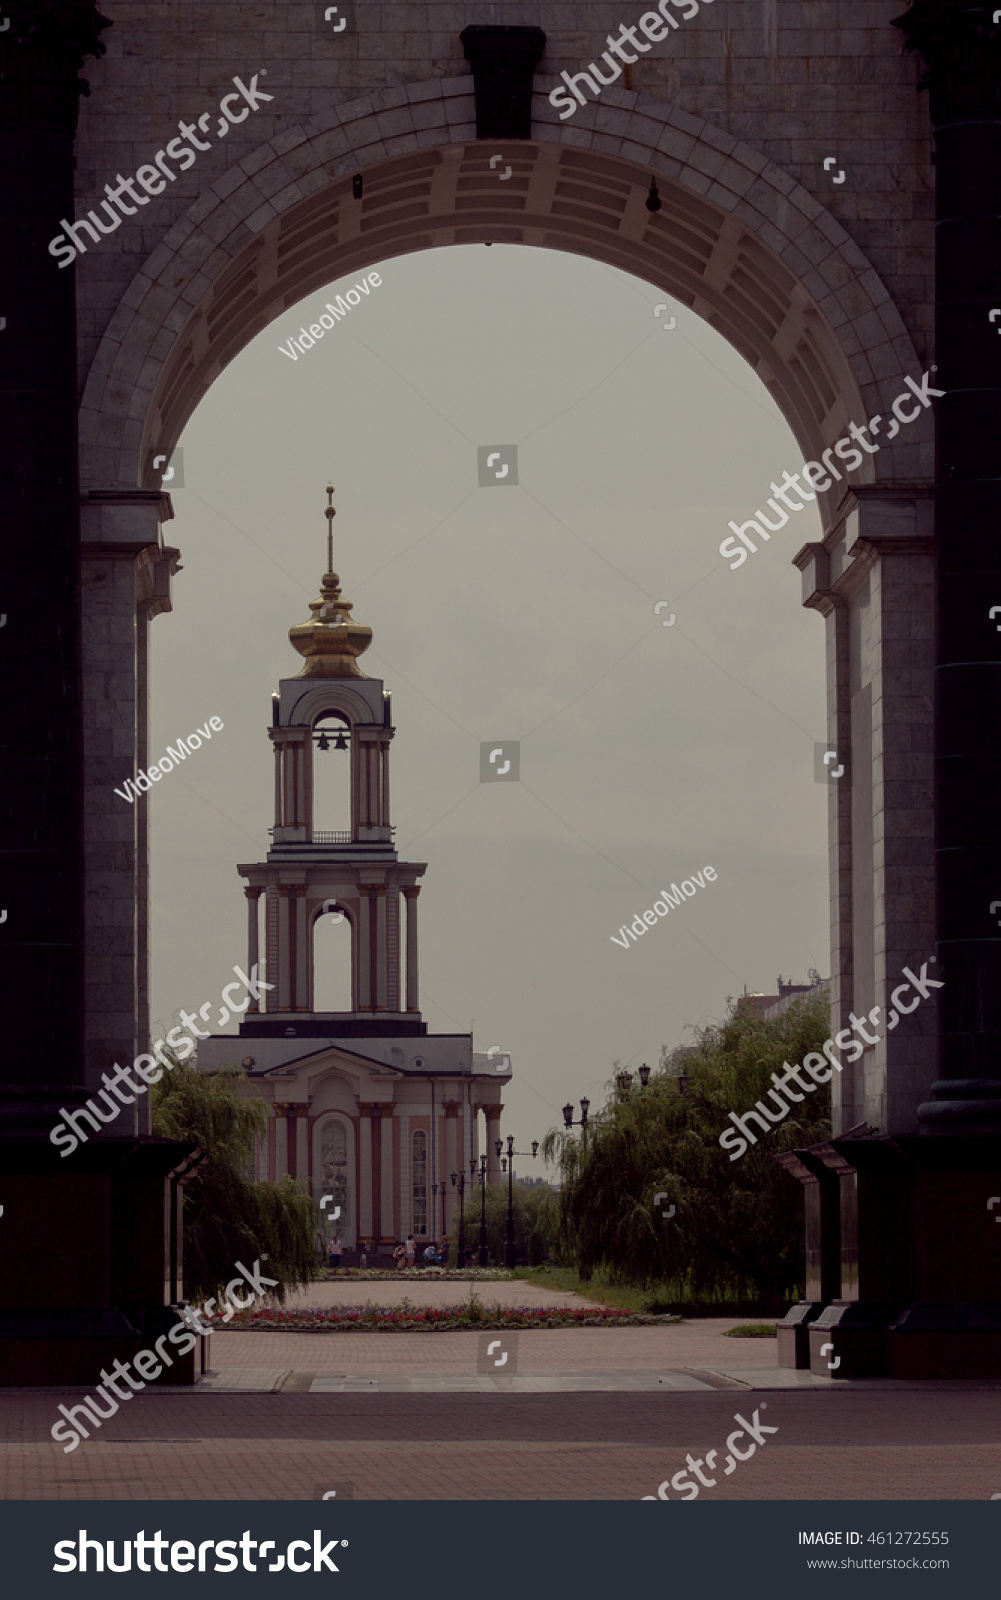 Arch of Triumph, Temple, trees, paved road, grassy lawn #461272555